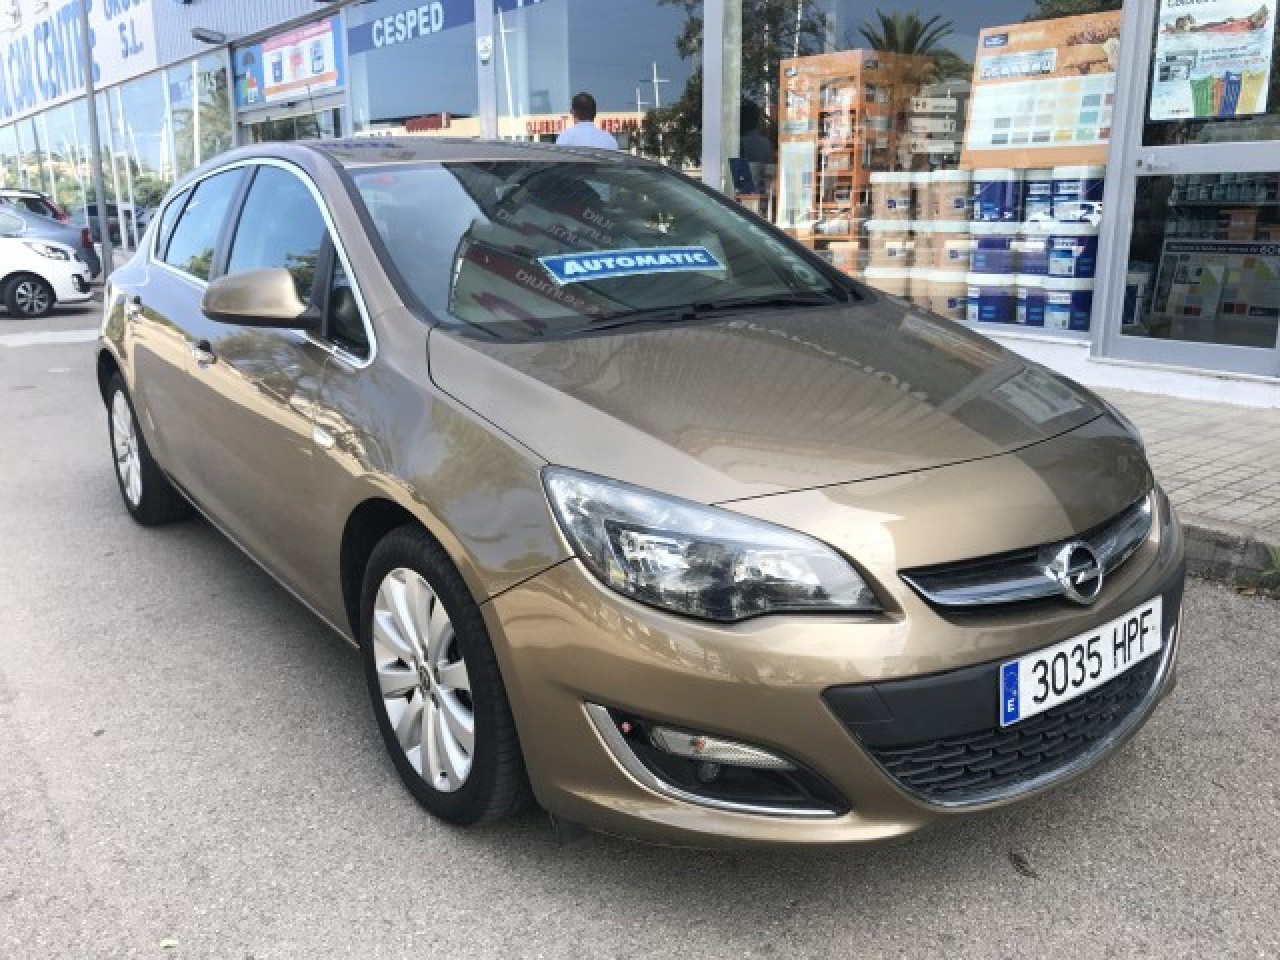 Opel Astra 1.4 Turbo 140BHP Excellence Automatic Hatchback 2013 